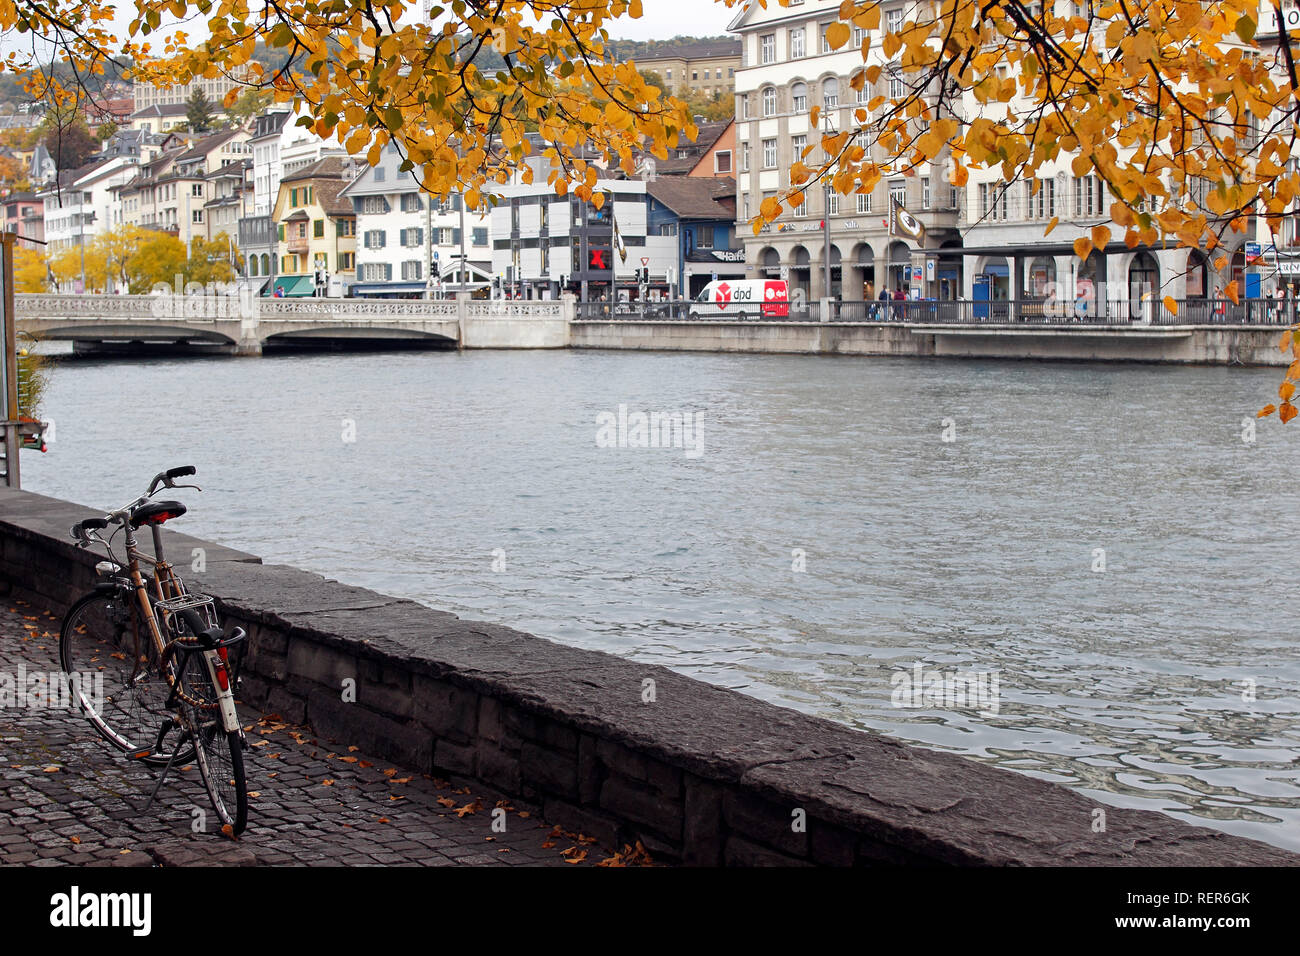 Switzerland Zurich Canton Zurich Swiss city on Limmat River and Lake Old Town on river with bicycle Stock Photo